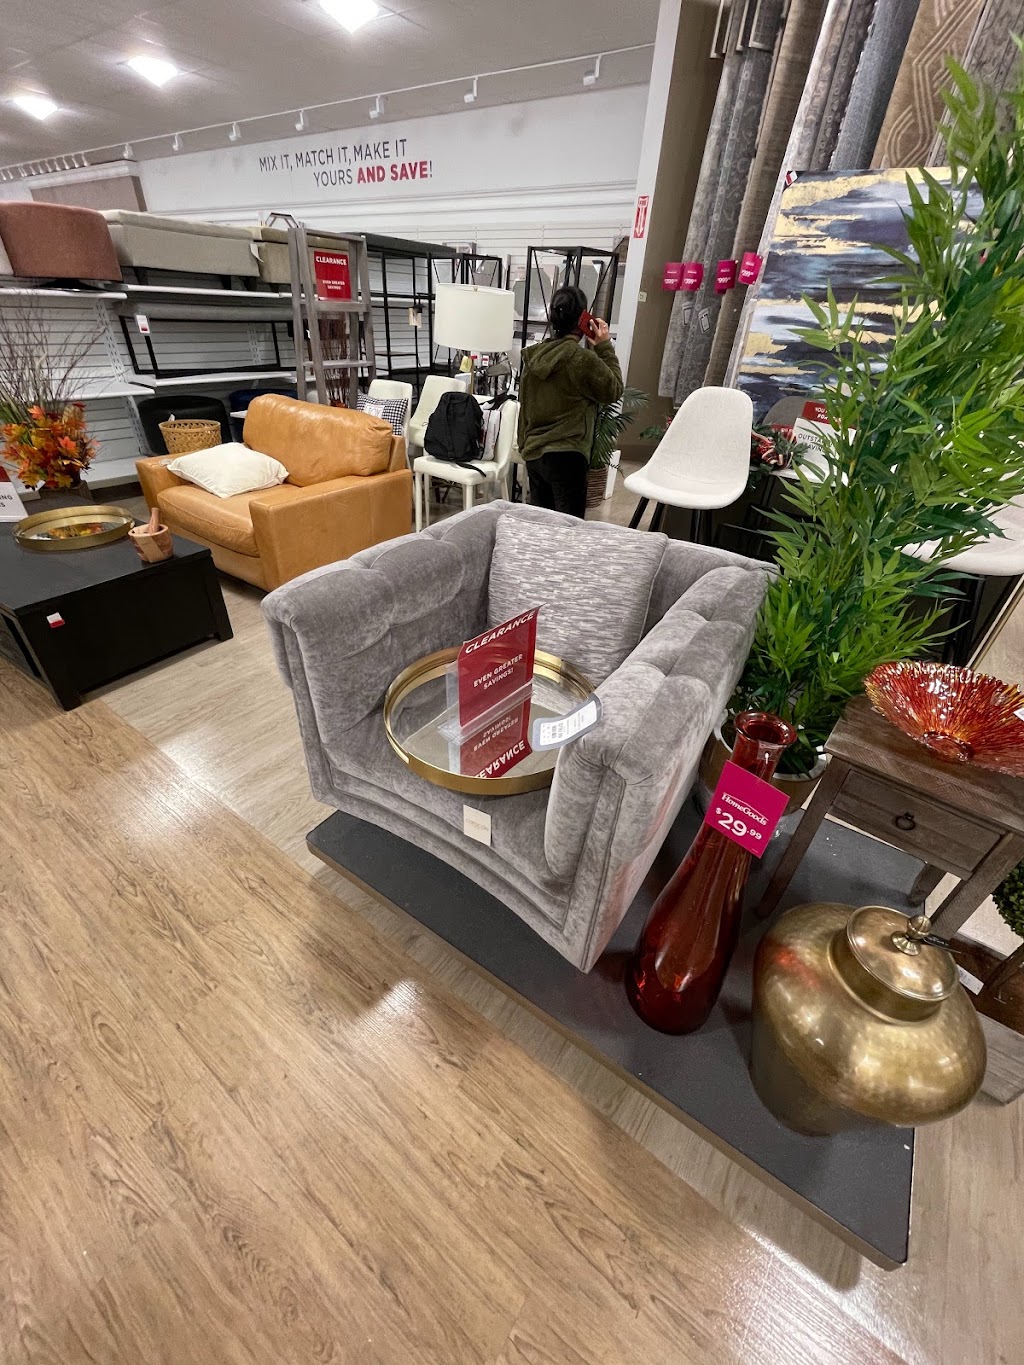 Marshalls & HomeGoods | 1762 Old Country Rd, Riverhead, NY 11901 | Phone: (631) 727-2380